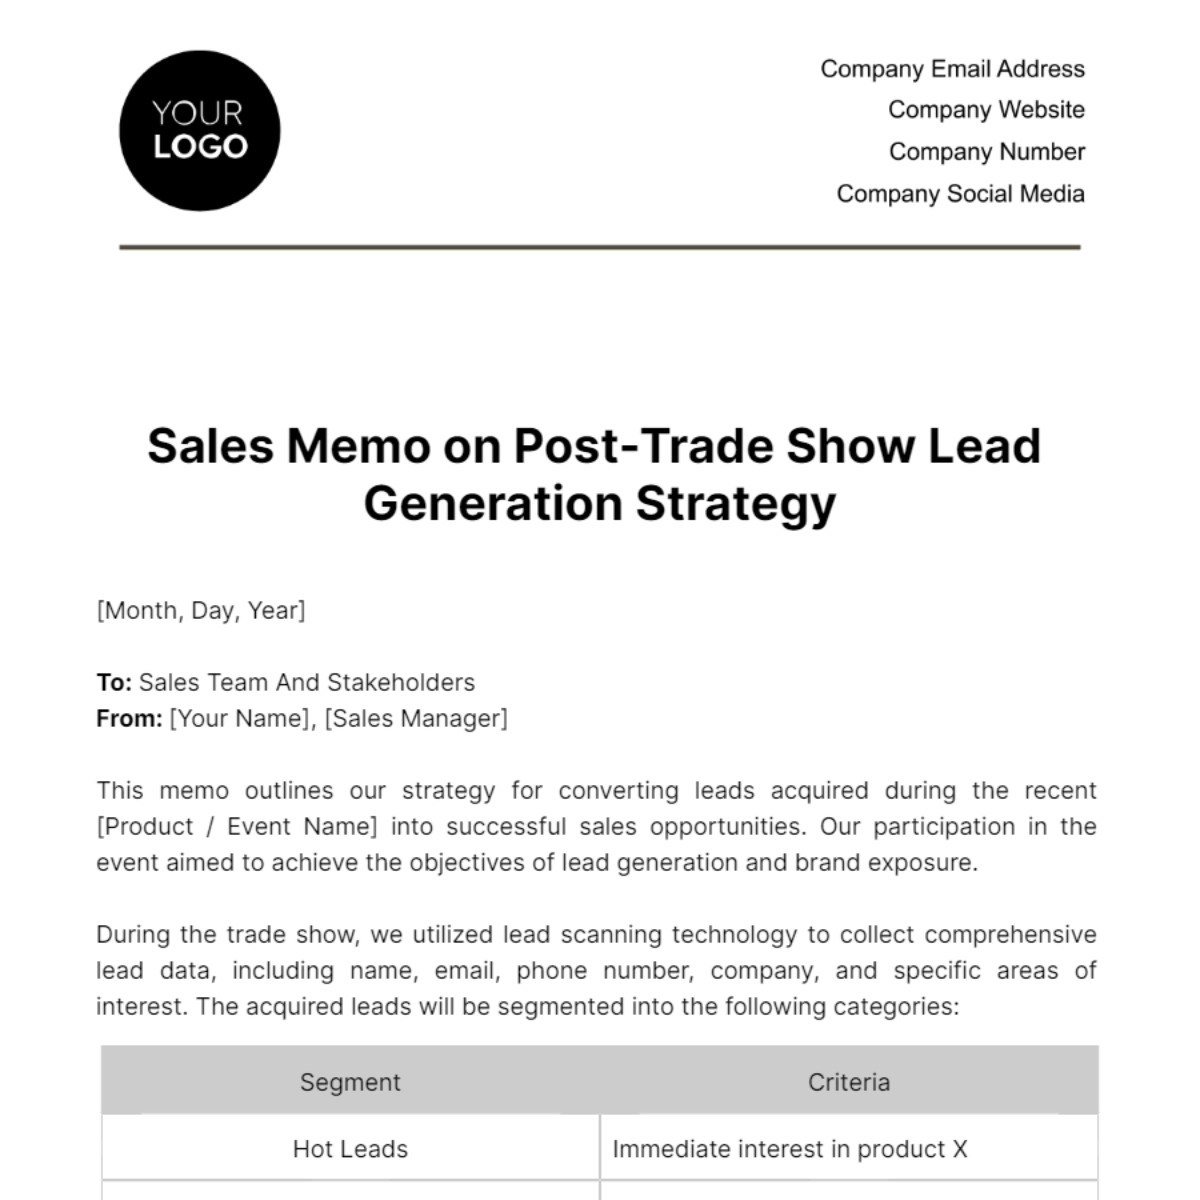 Sales Memo on Post-Trade Show Lead Generation Strategy Template